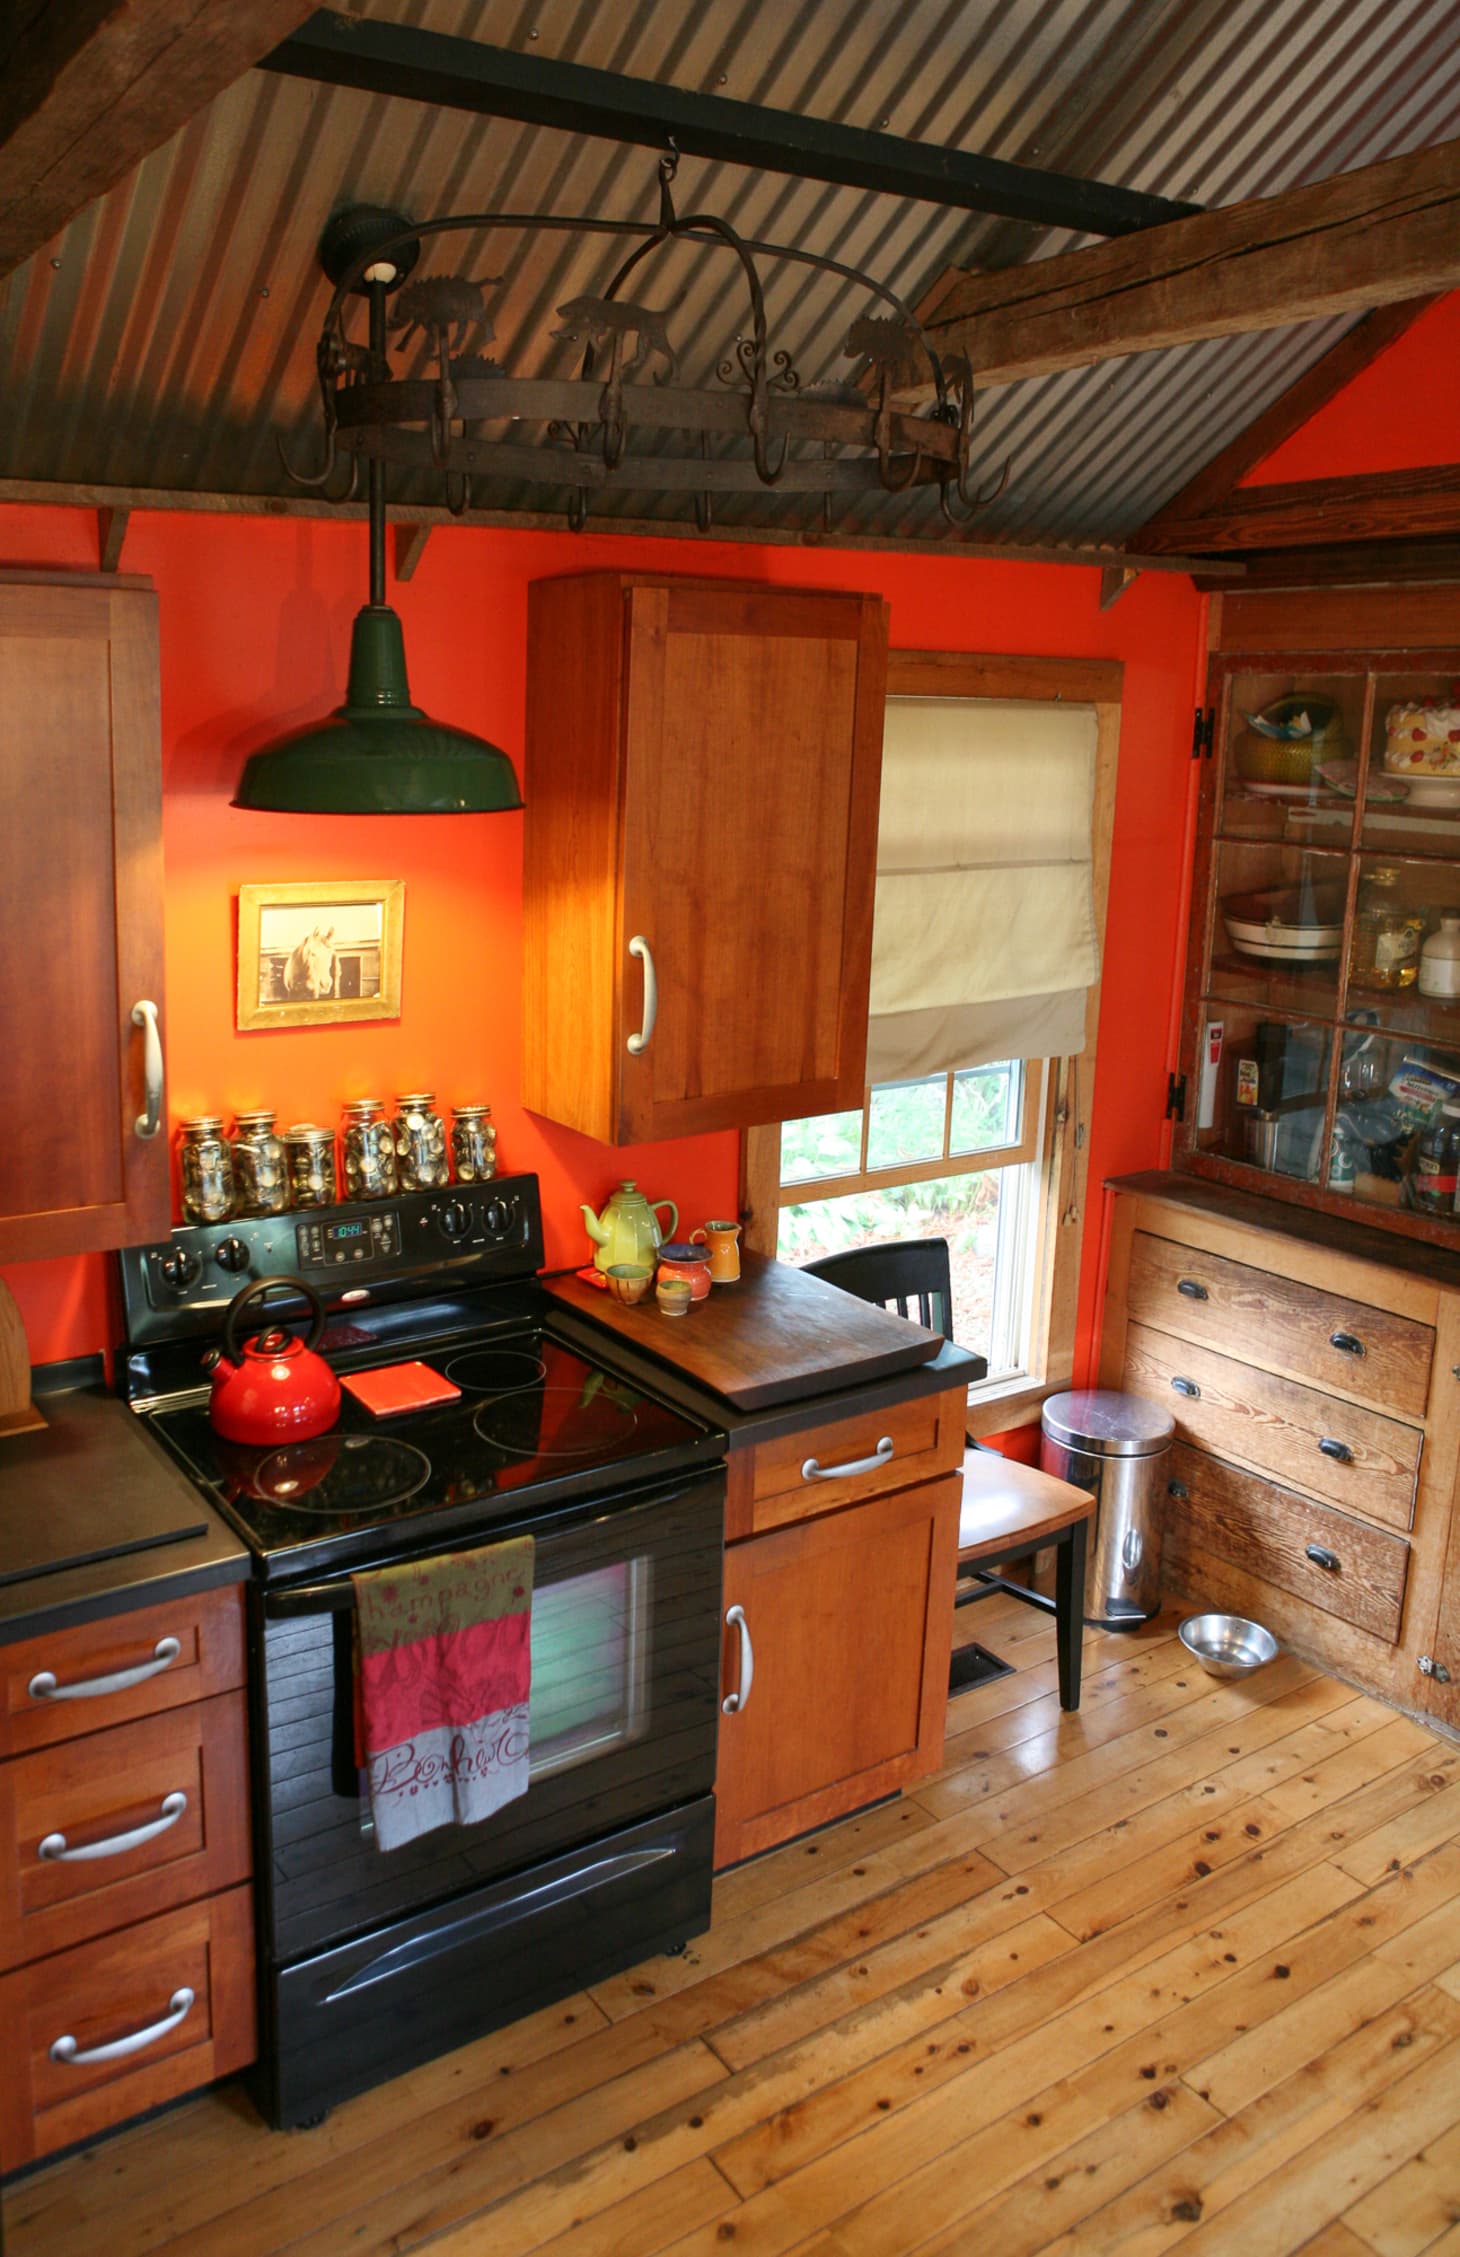 A Historical and Hand-Crafted “Folk Nouveau” Kitchen in Rhode Island